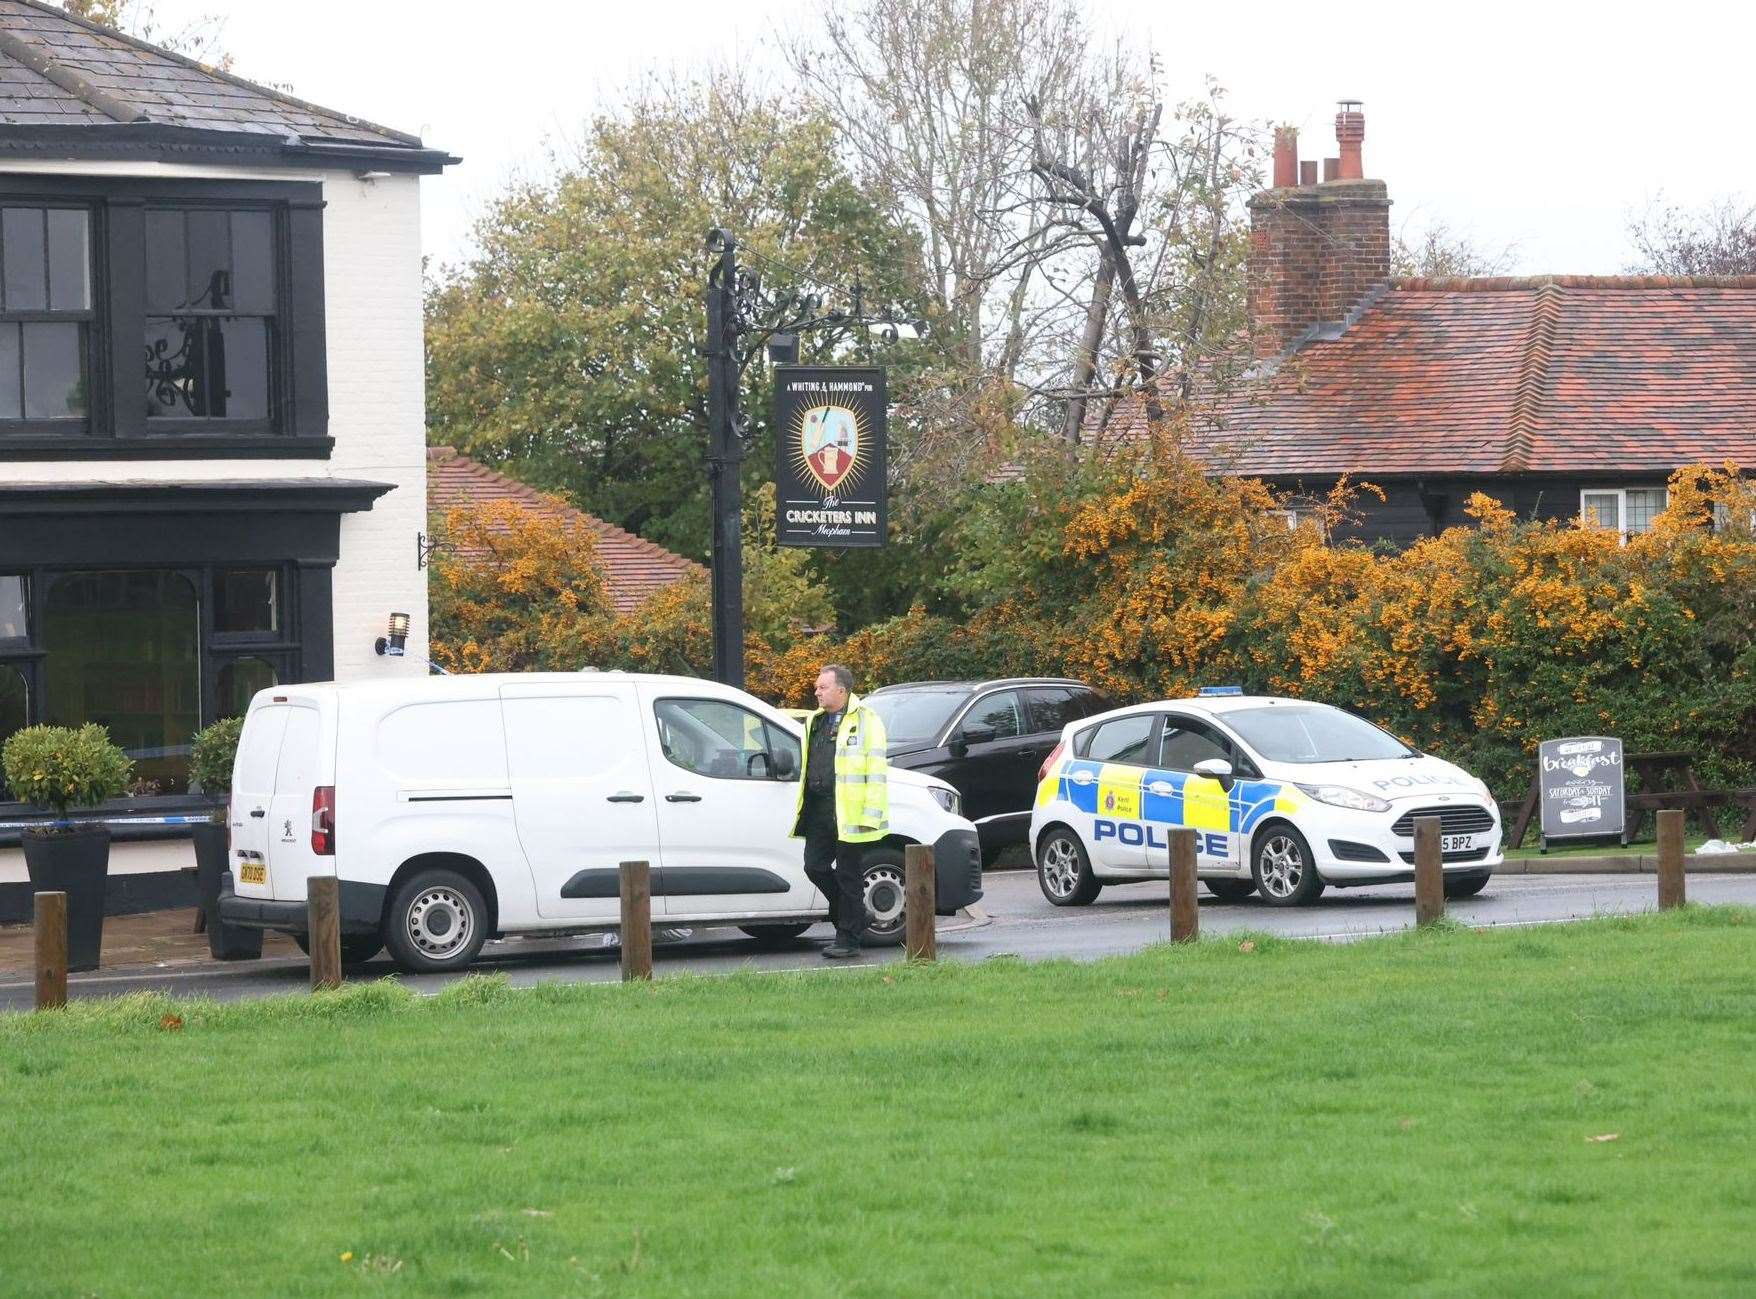 Police at the Cricketers Inn pub in Meopham where Craig Allen was killed. Picture: UKNIP